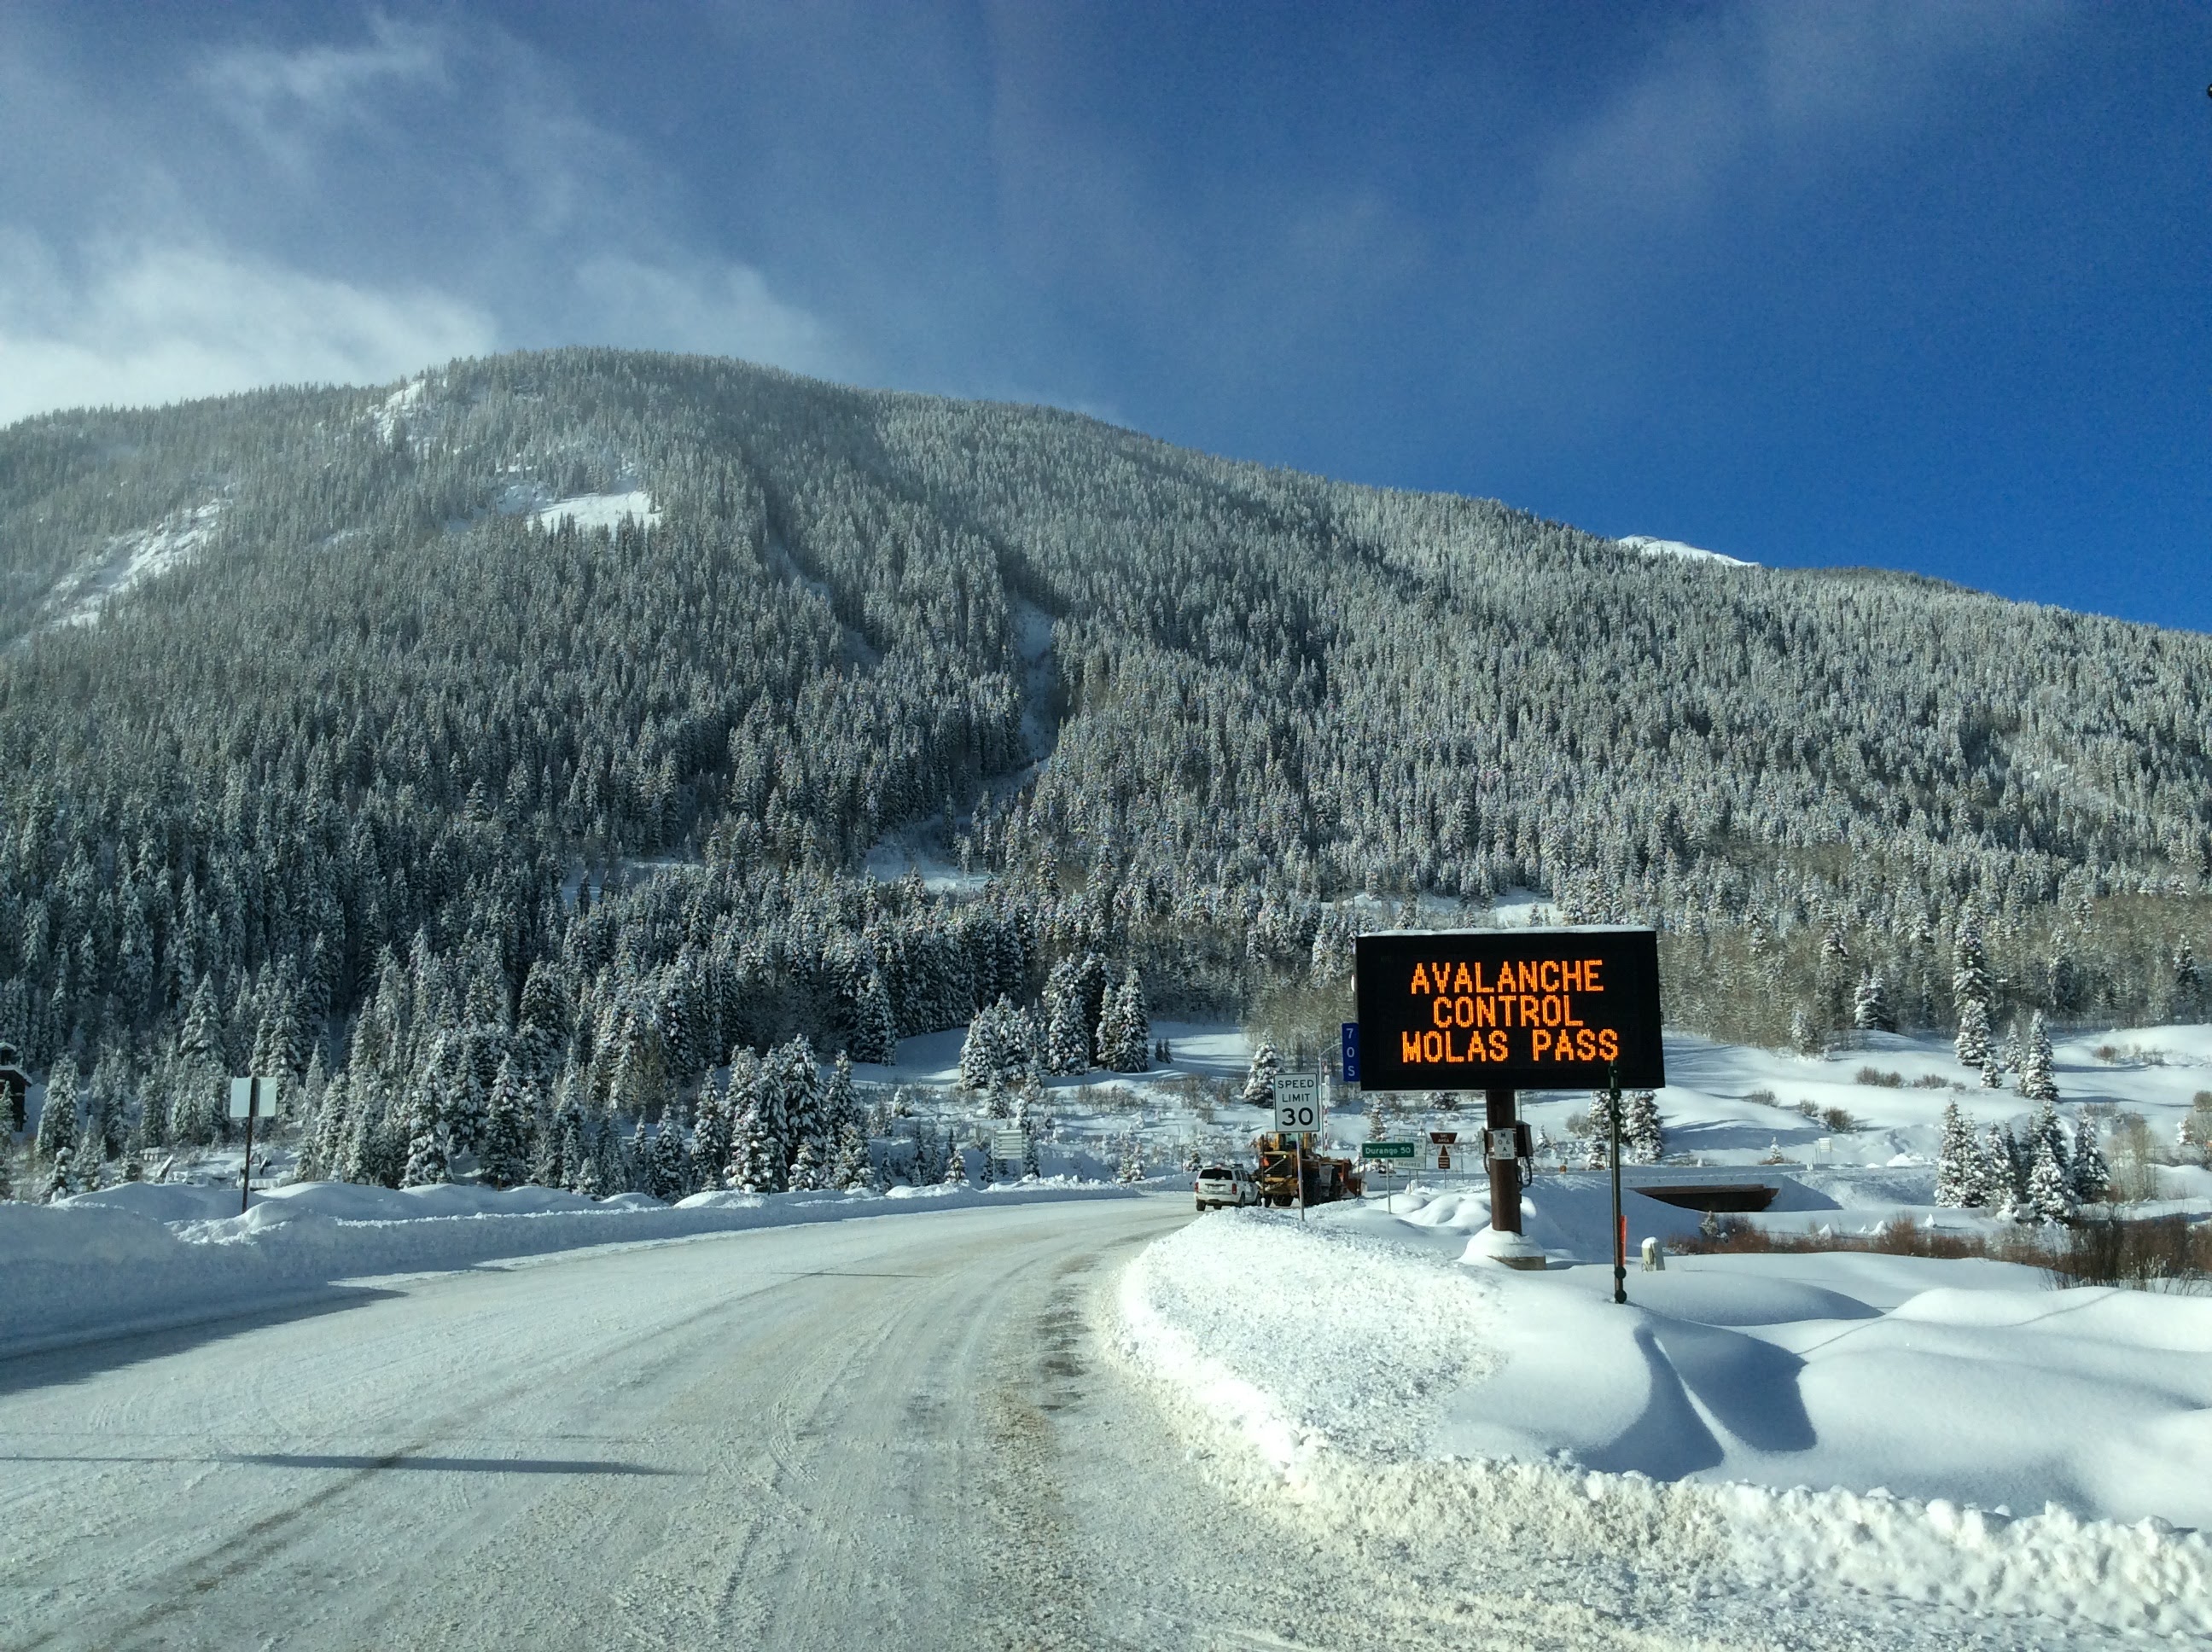 Avalanche operations Molas Pass.jpg detail image